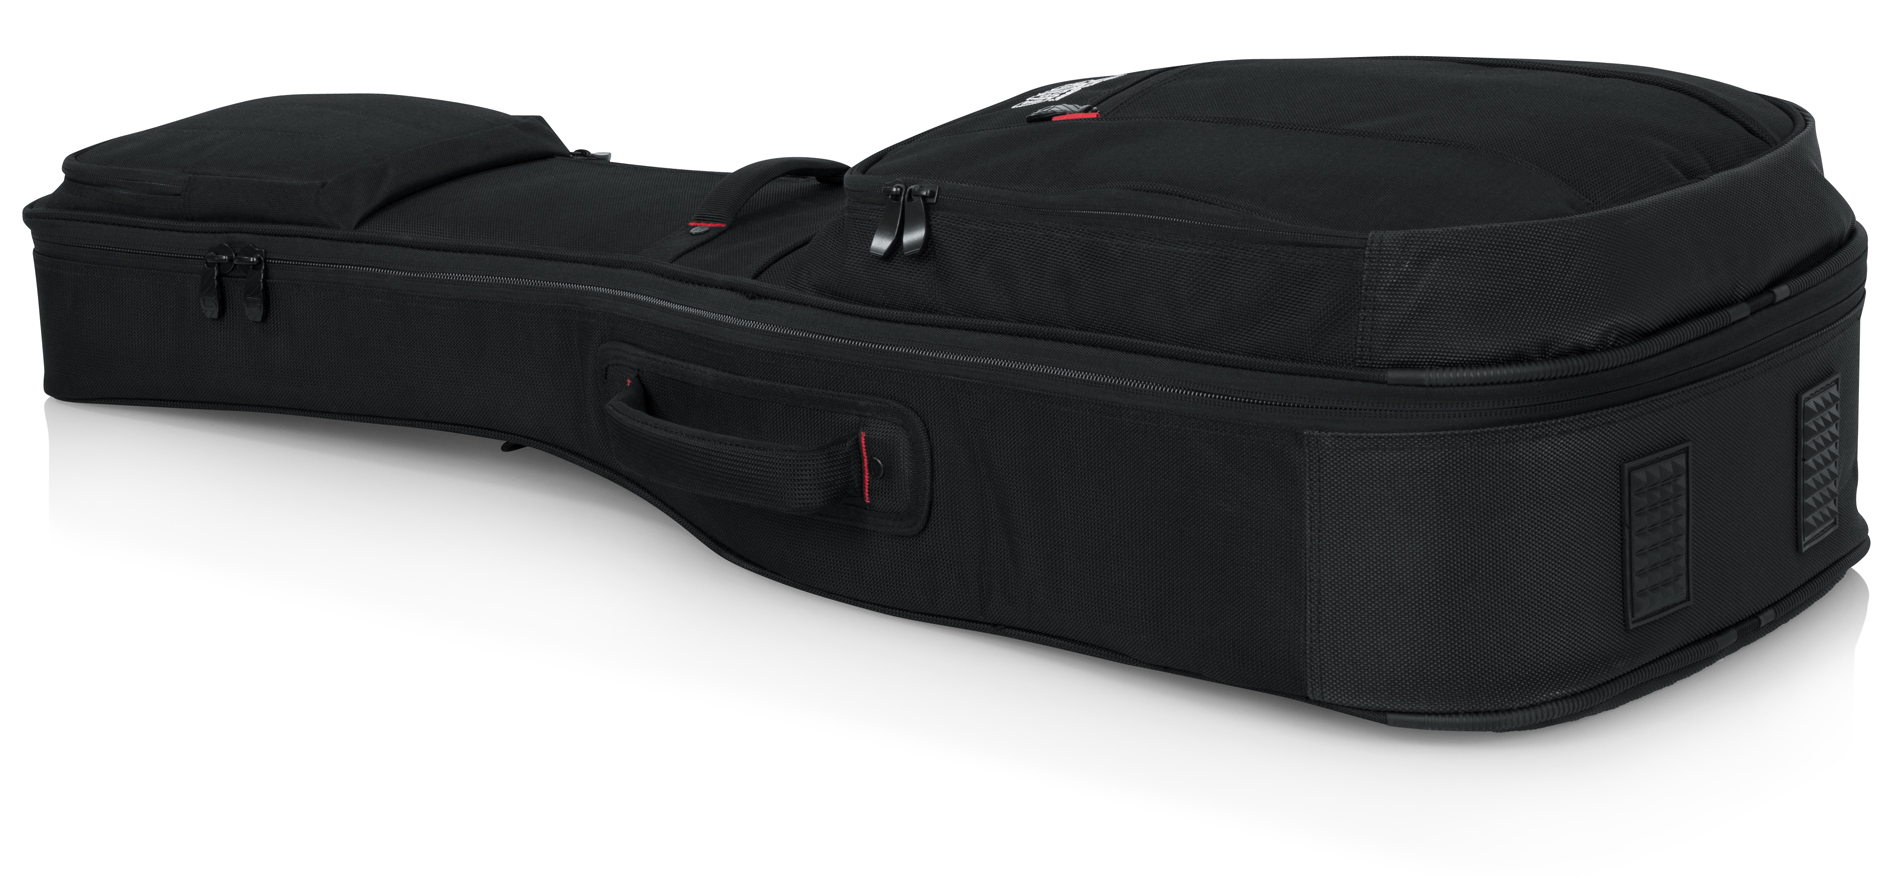 Pro-Go series Ultimate Gig Bag for Classical-G-PG CLASSIC